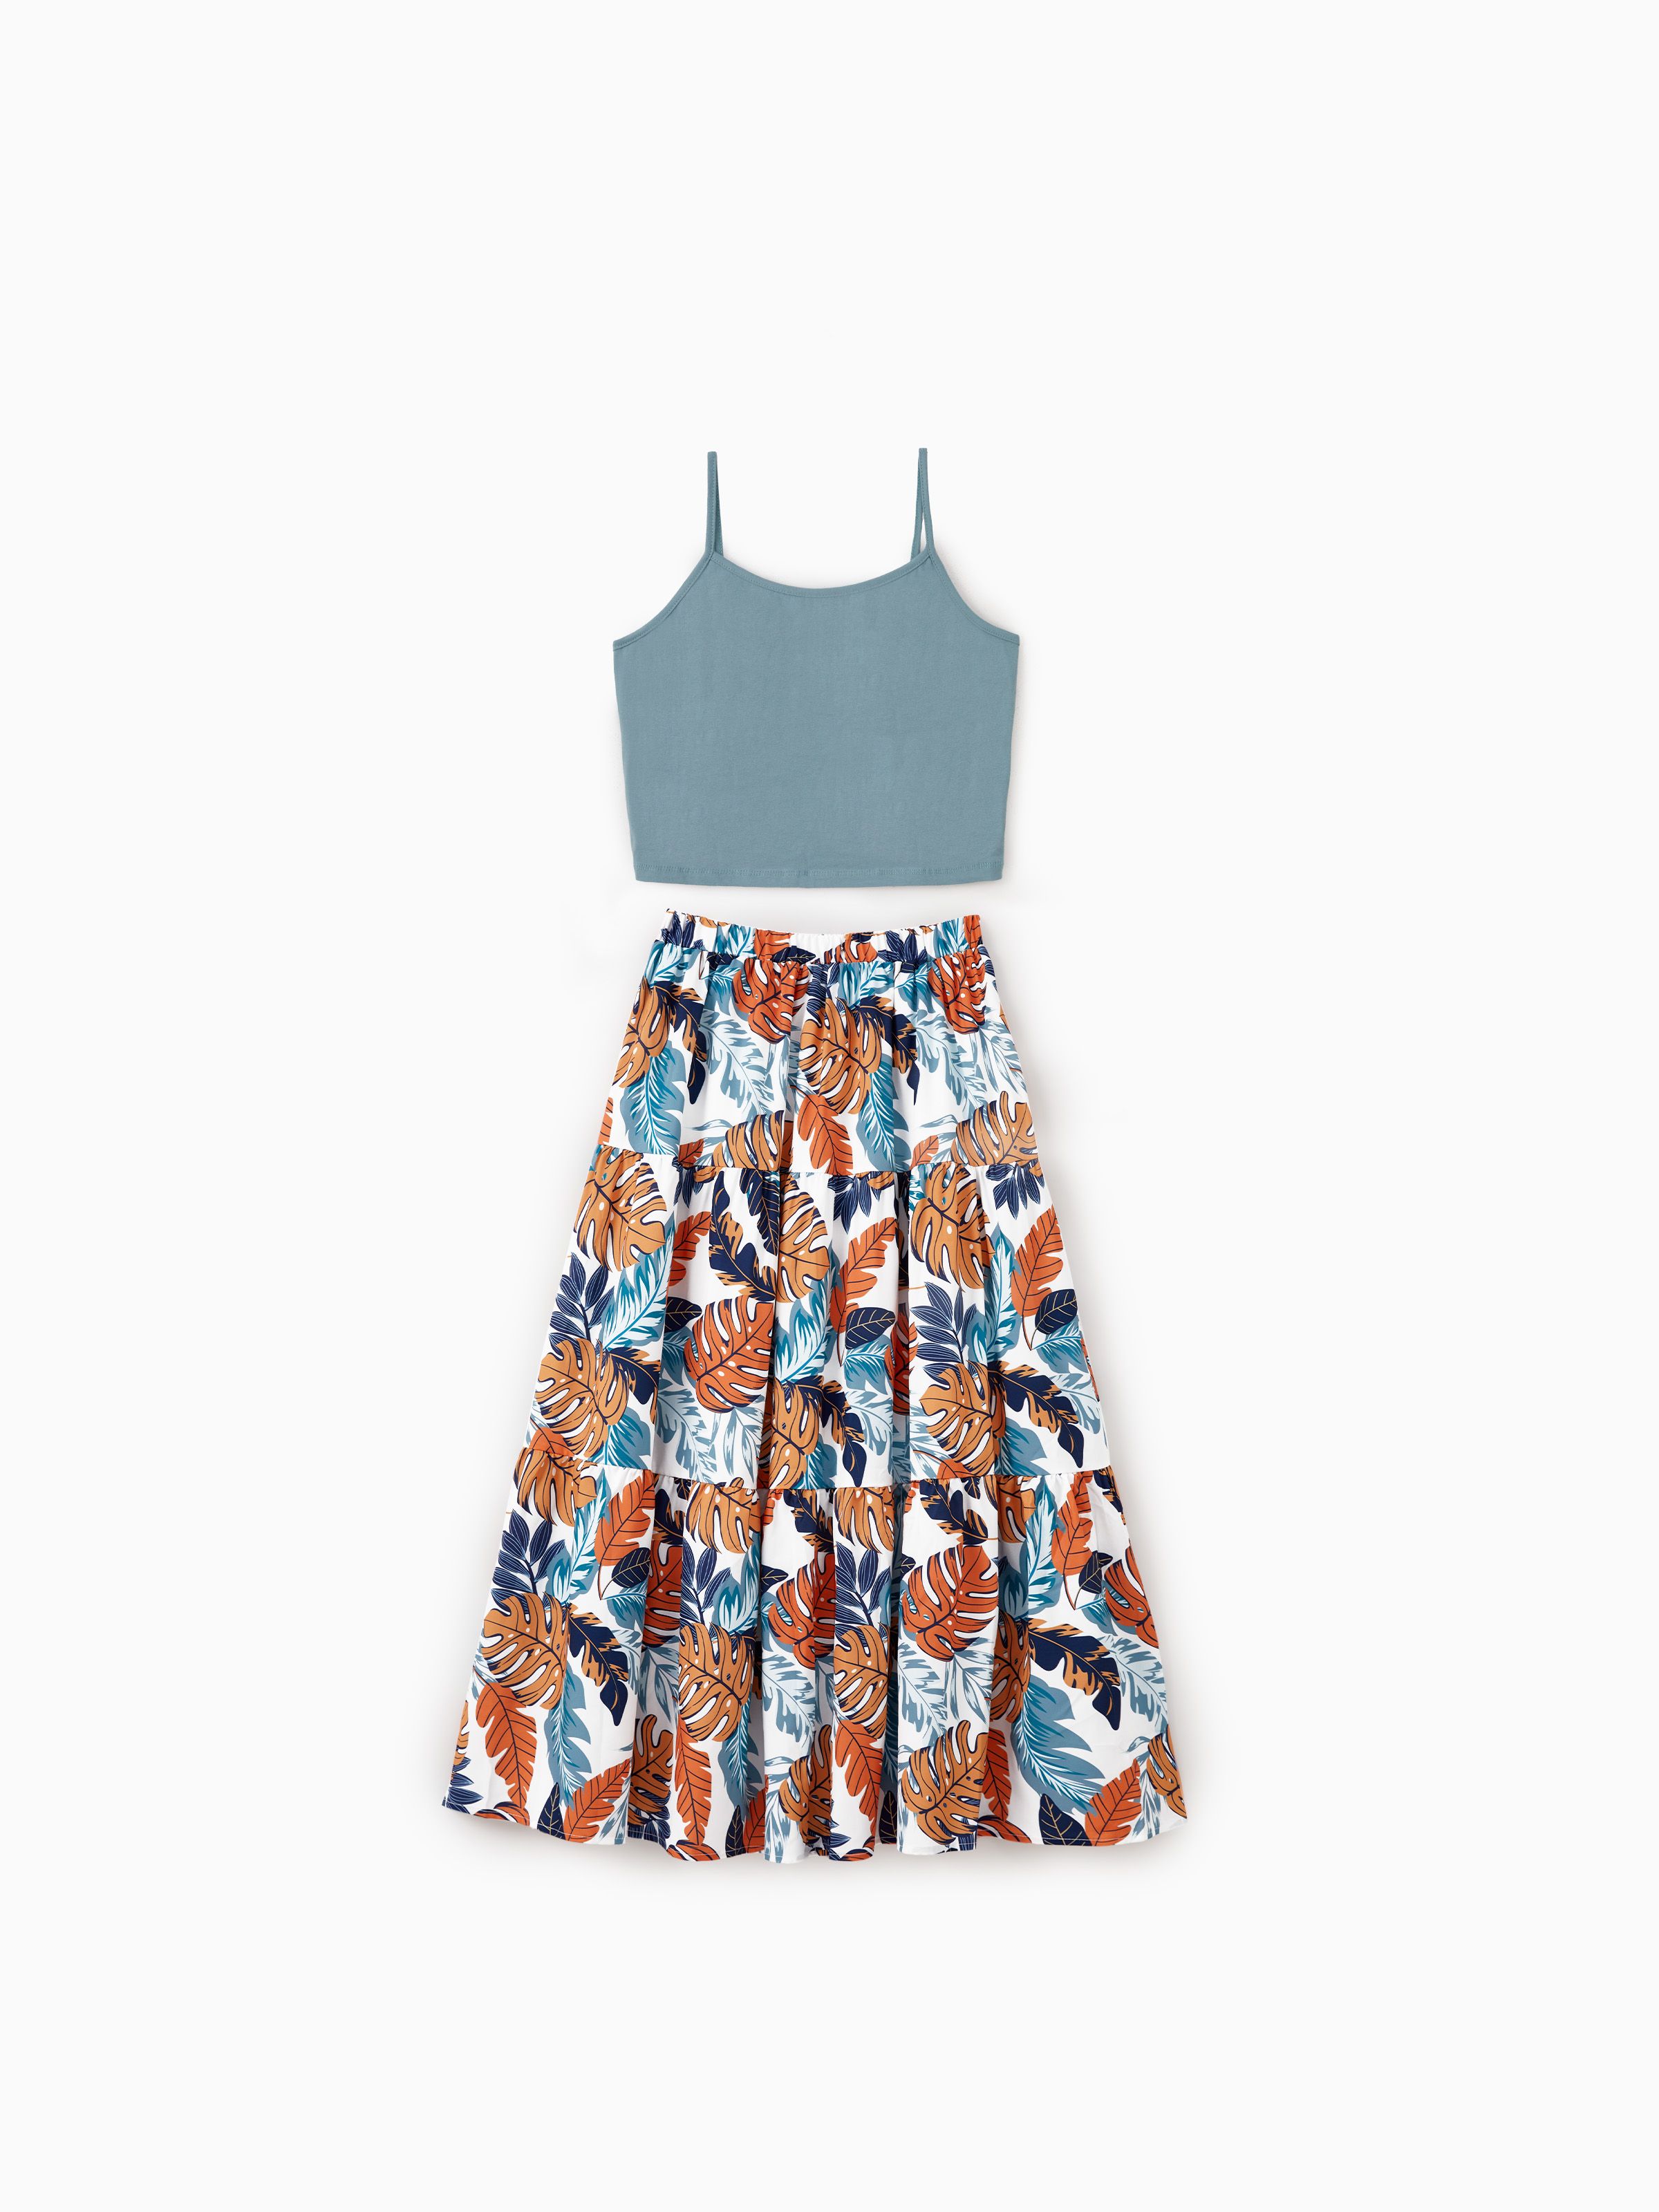 

Family Matching Sets Floral Beach Shirts or Cami Top Elastic Waist A-Line Skirt Co-ord Sets